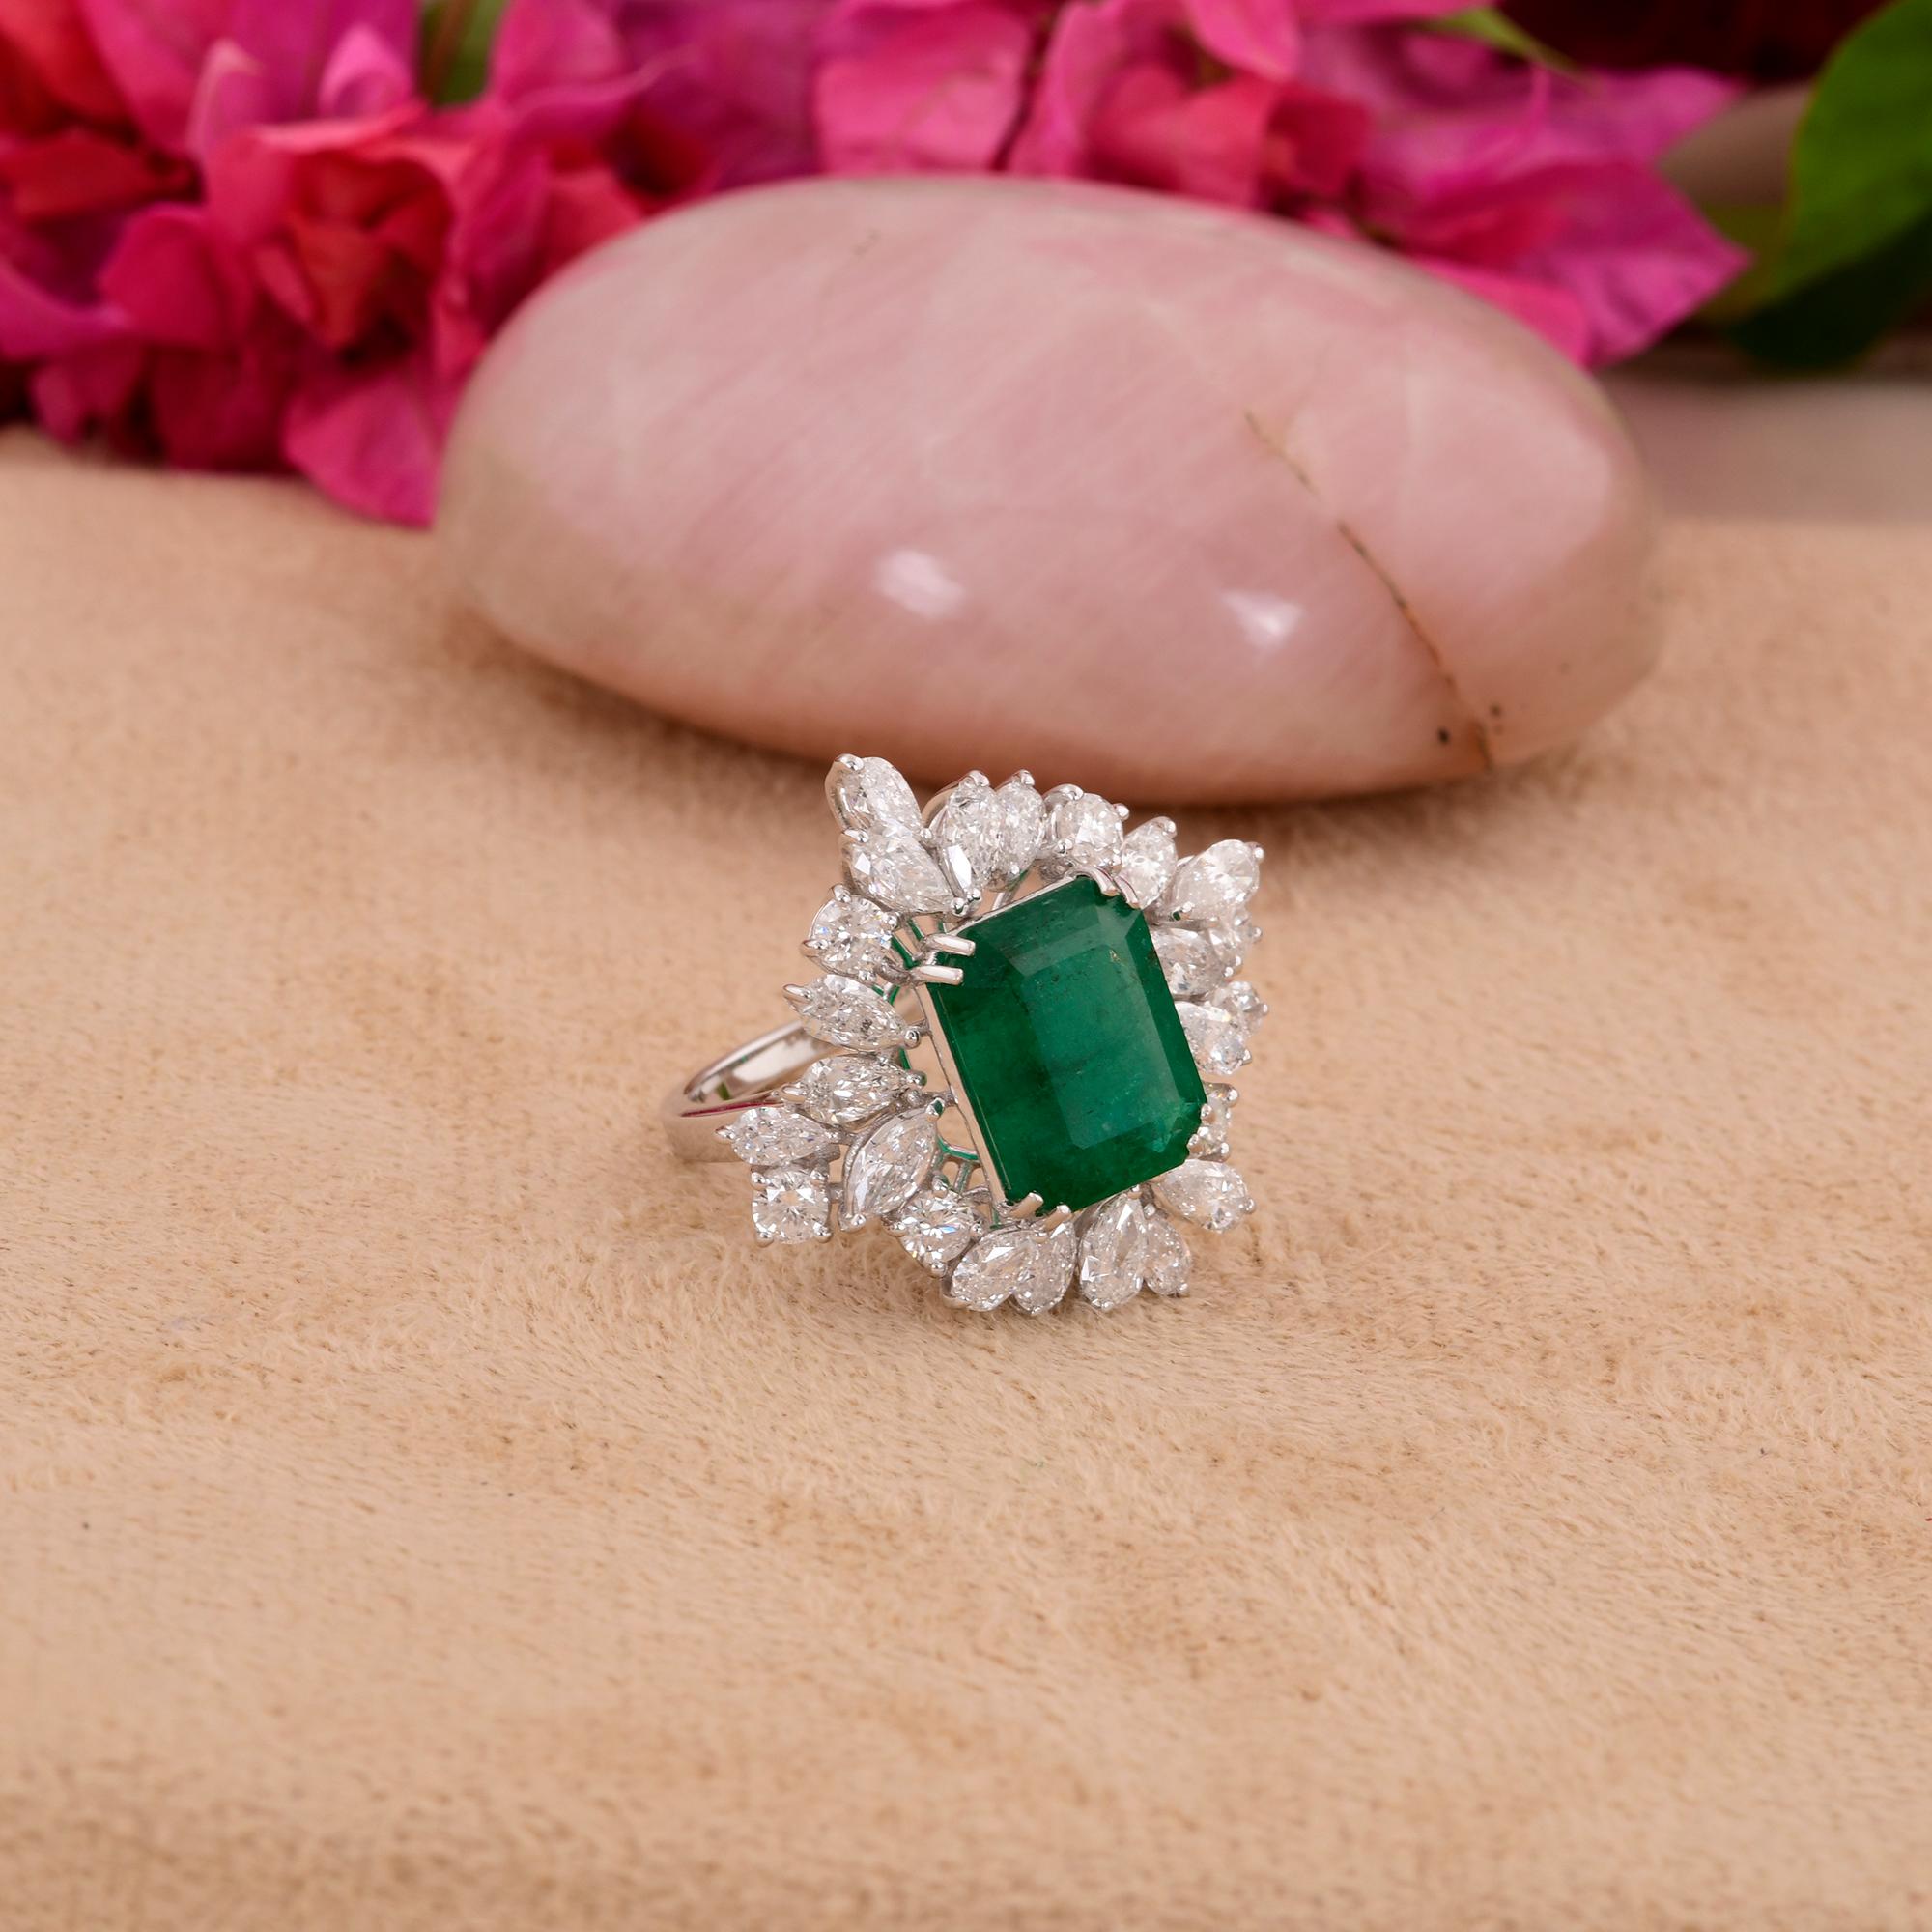 Crafted with meticulous attention to detail, the ring features a handcrafted setting in luxurious 14 Karat White Gold, adding a touch of understated elegance to the design. The polished gold complements the vibrant green hue of the emerald and the